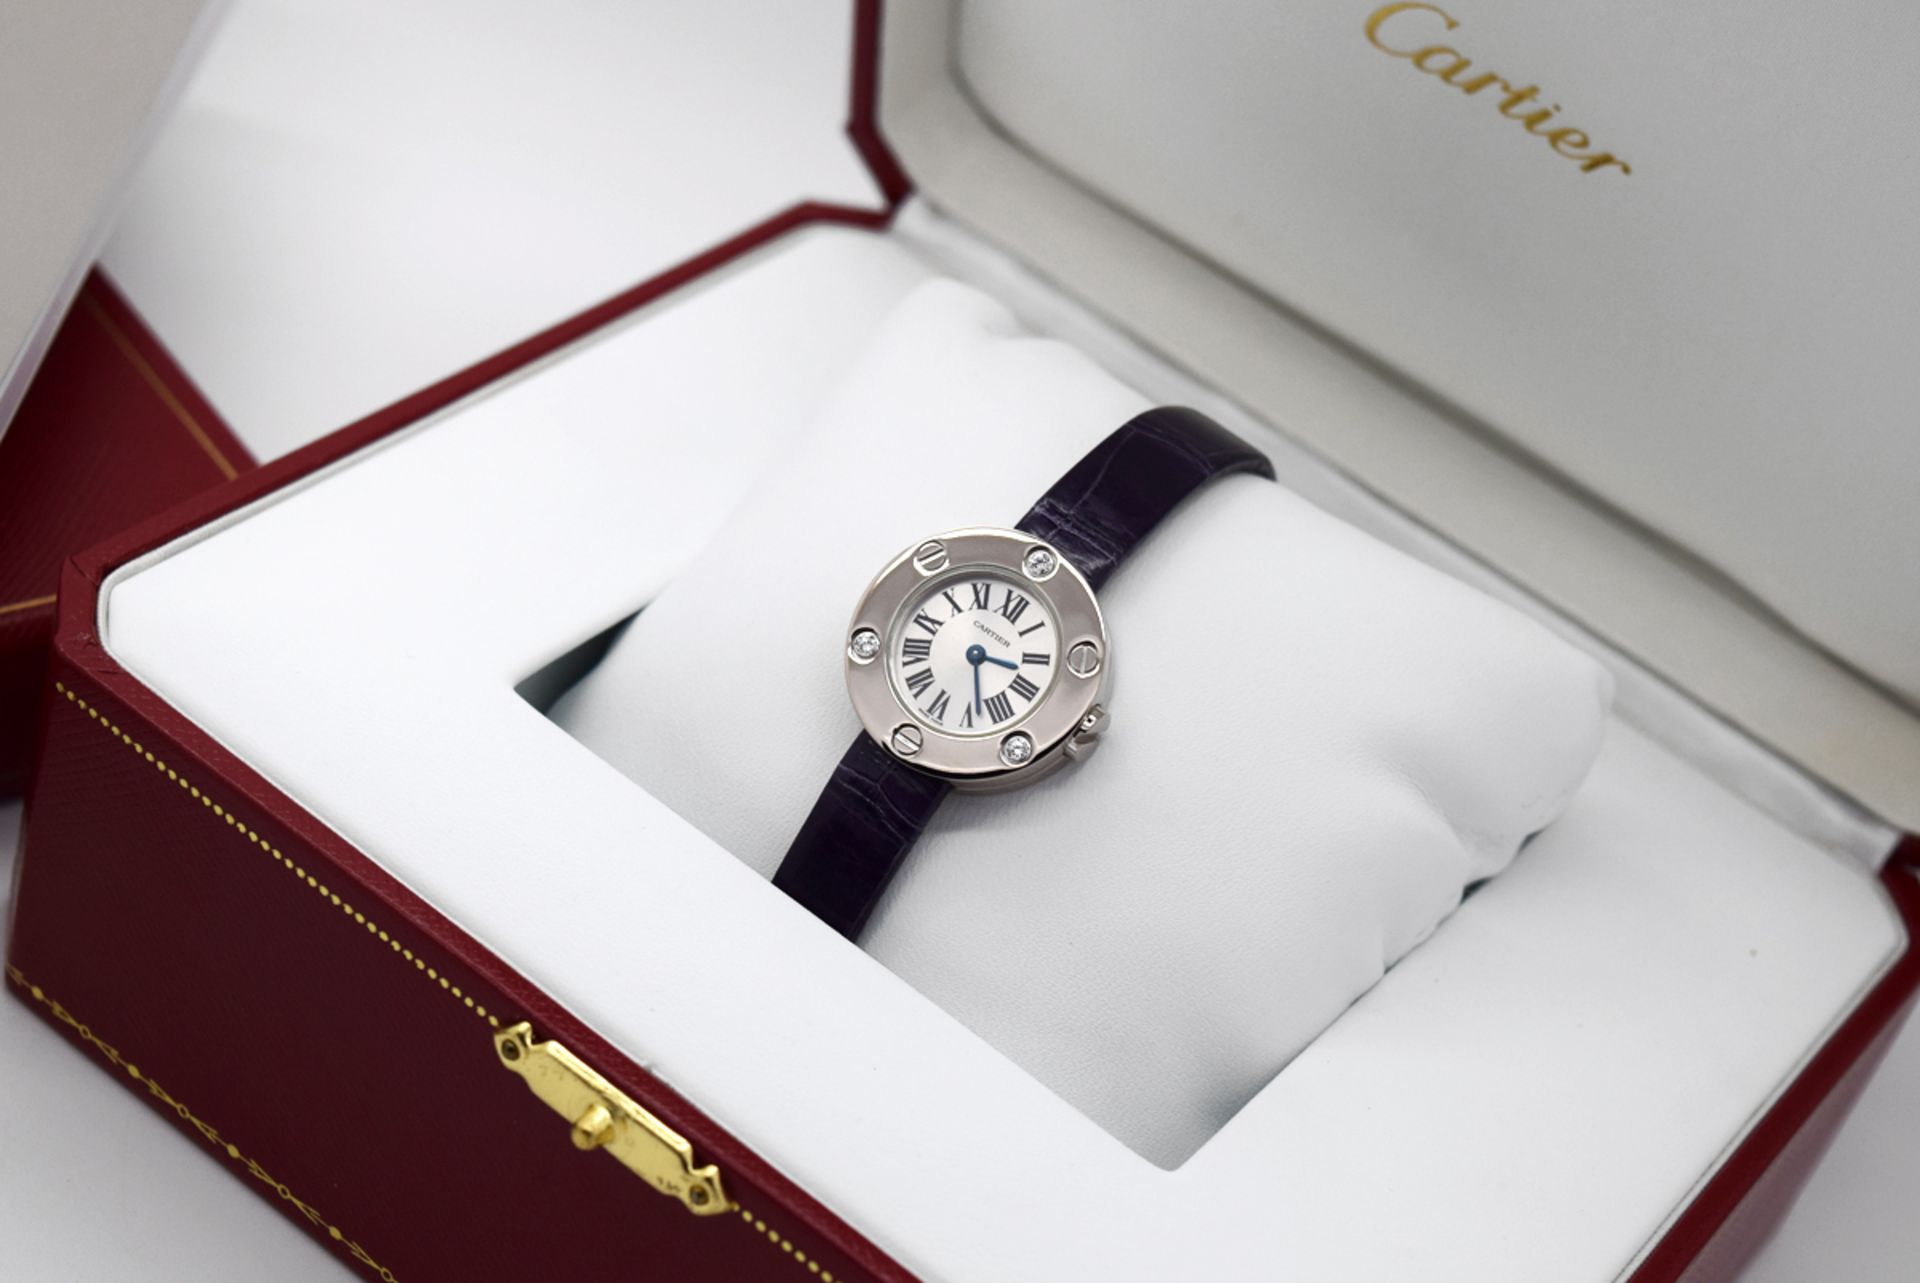 Cartier 'Love' Diamond Watch - WE800131 - White Gold and Diamonds - Box and Papers! - Image 2 of 12